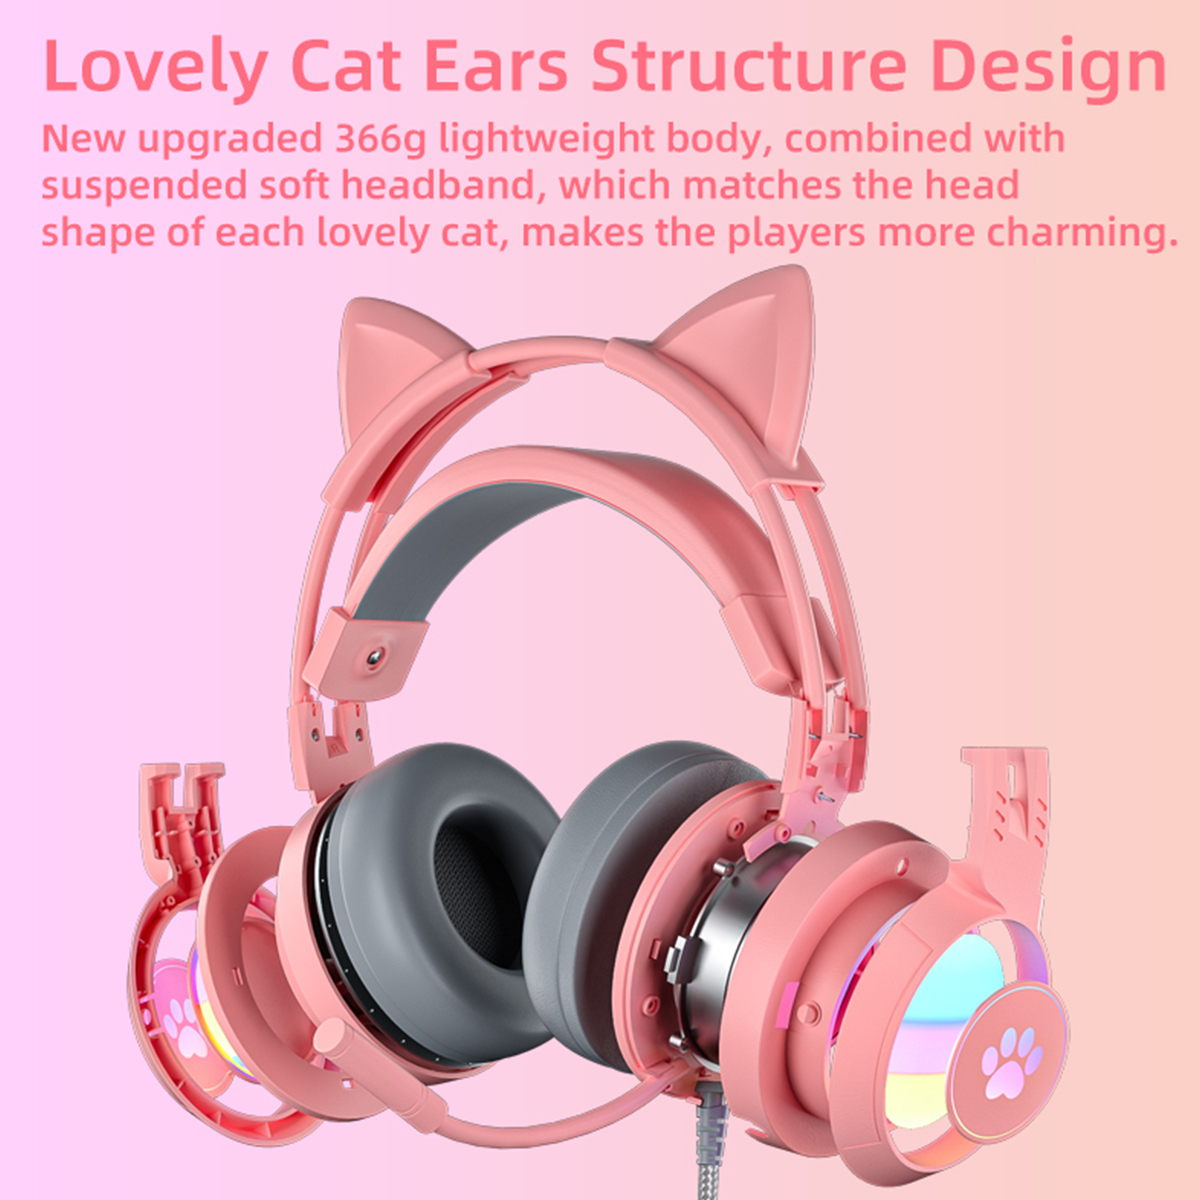 G25-Gaming-Headphone-35mm-USB-Wired-Headset-50mm-Large-Drivers-Colorful-Light-Cute-Headset-with-Mic-1970122-4